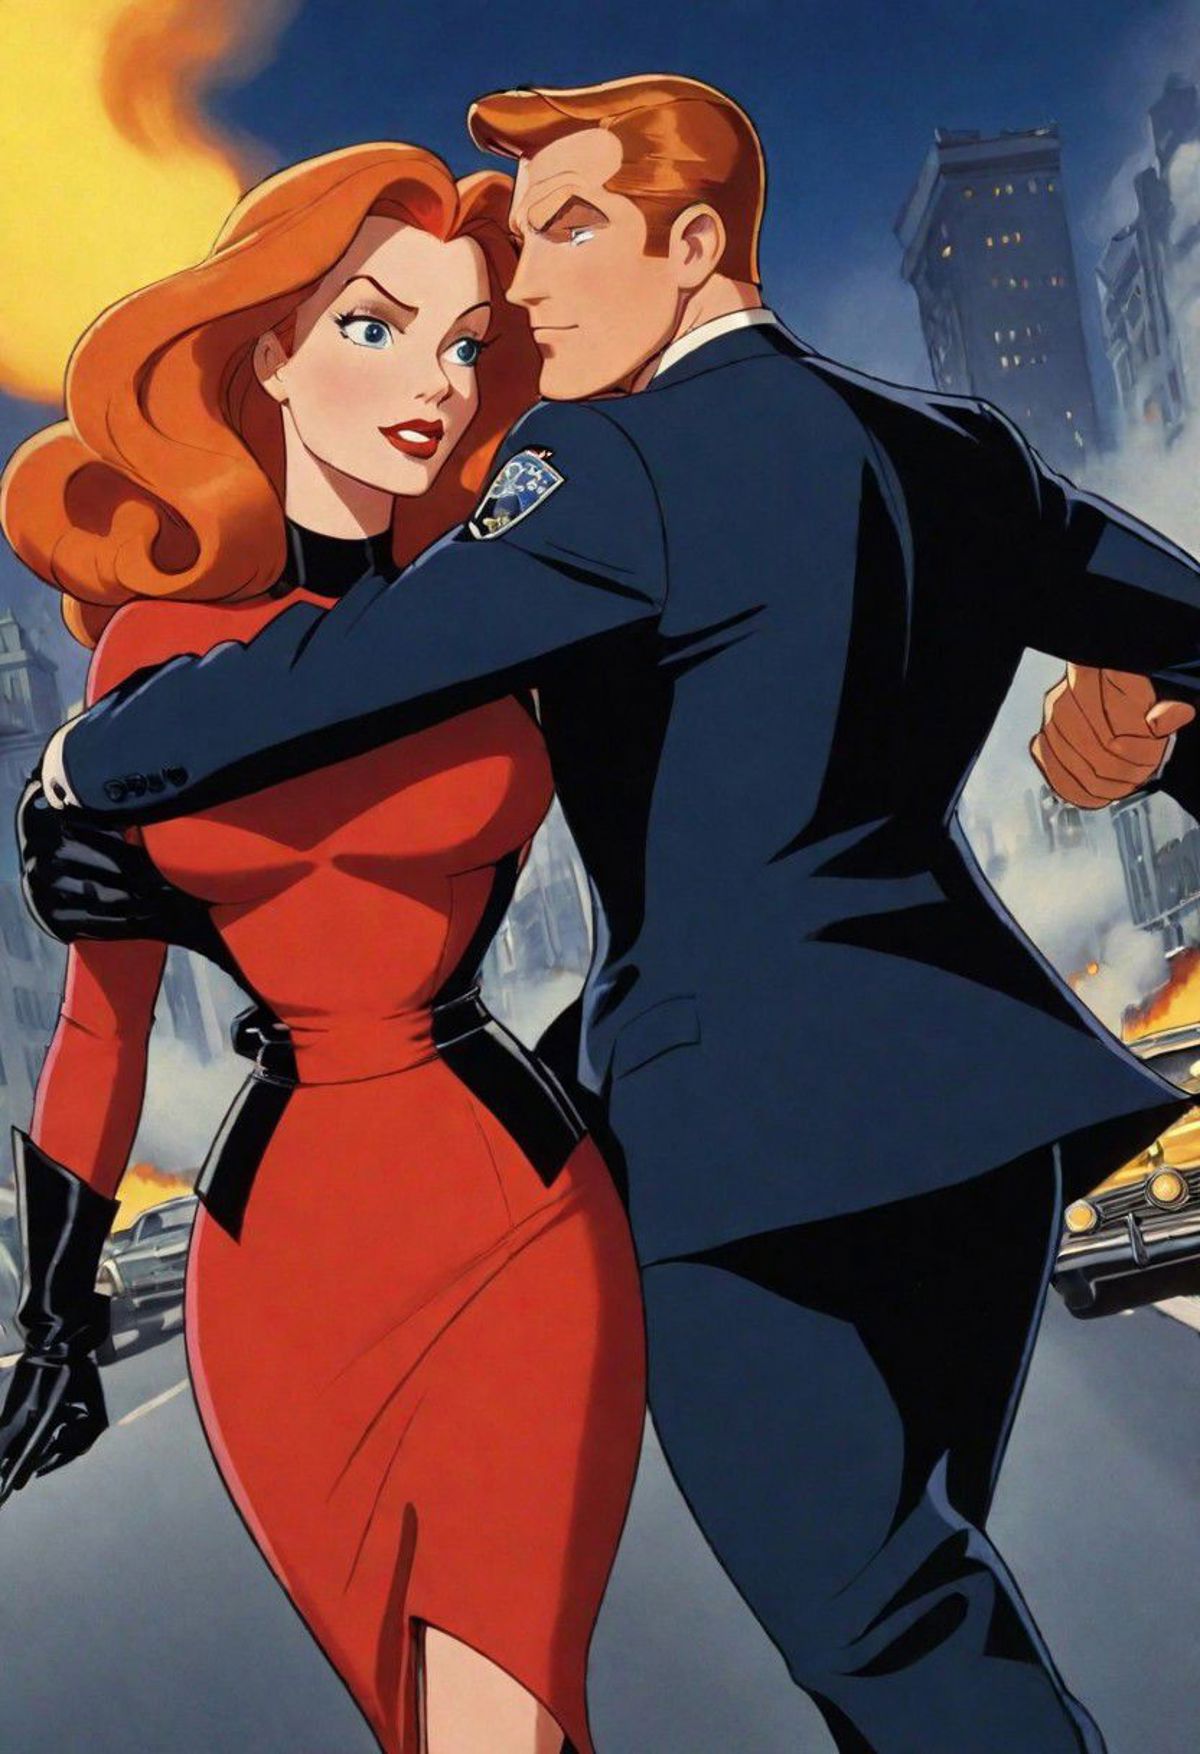 A cartoon drawing of a man and woman in a red dress and blue suit embracing each other on a street.